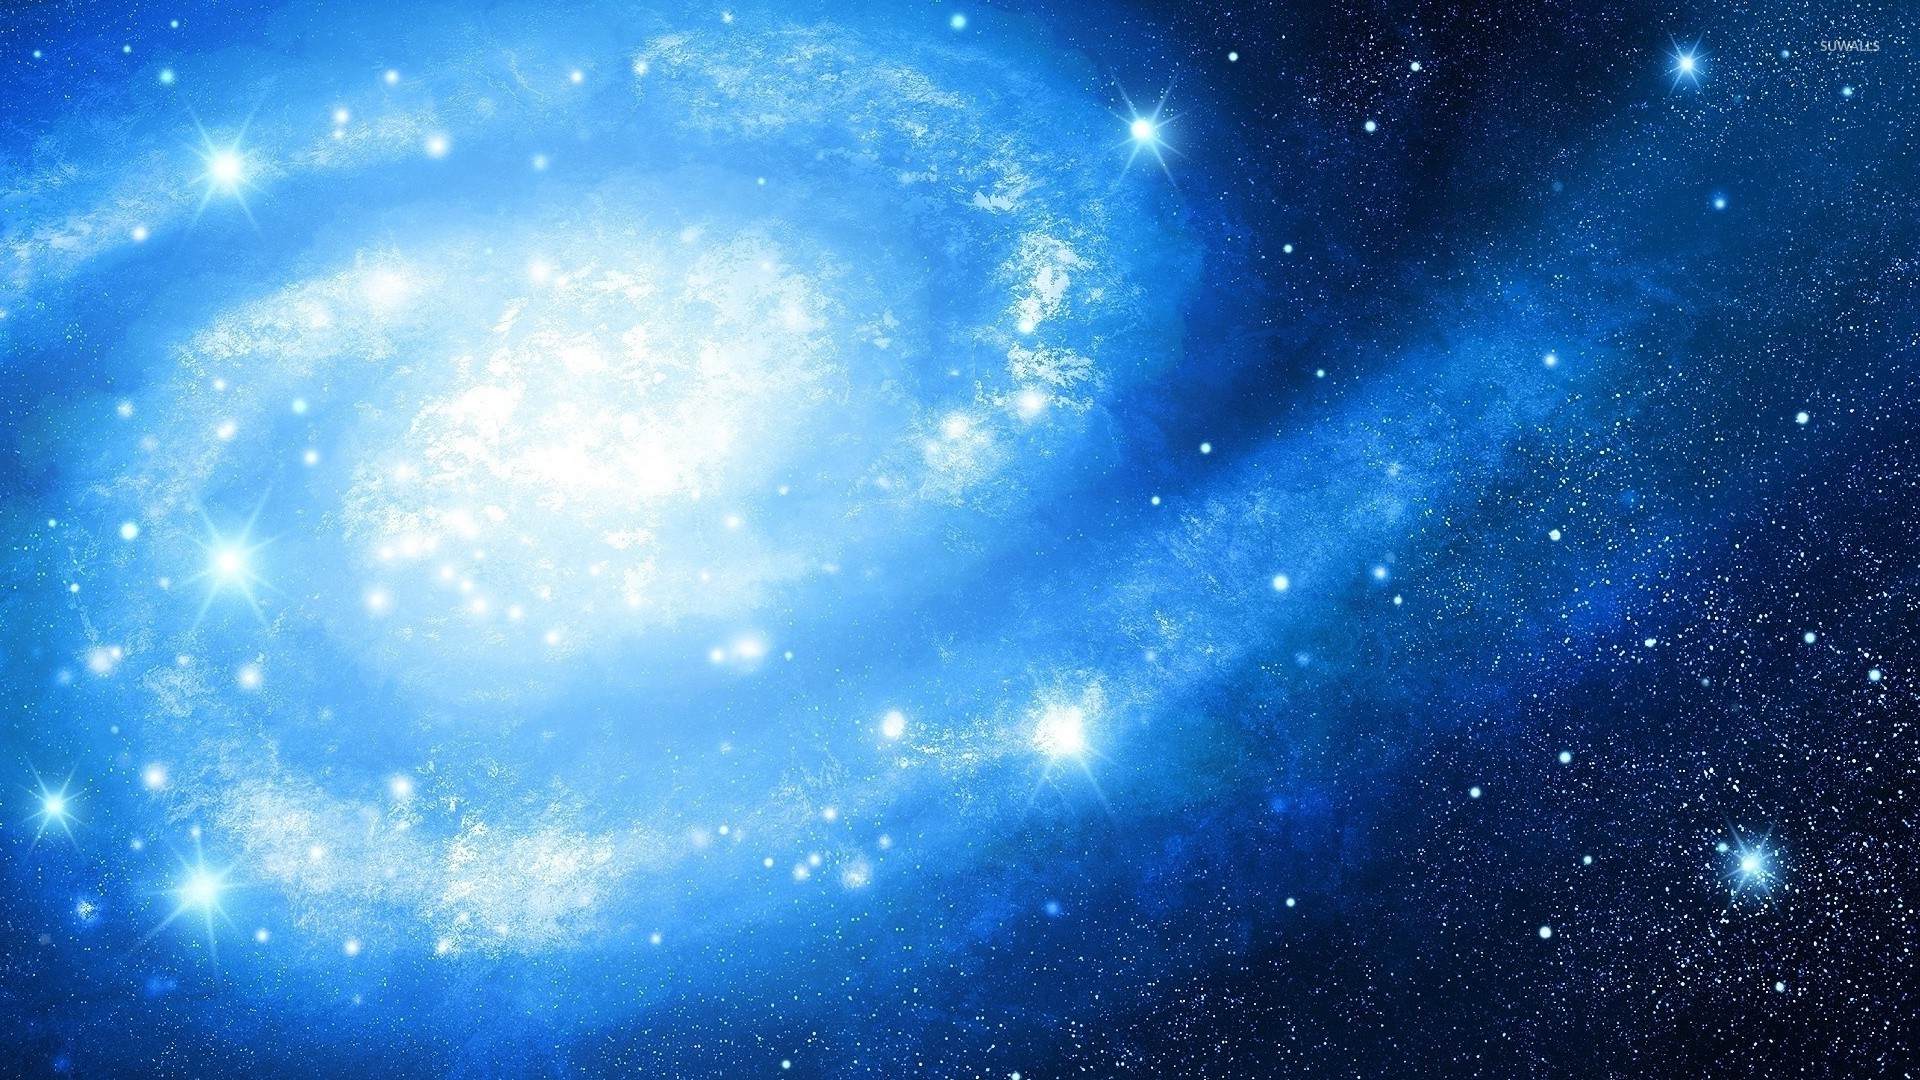 galaxy wallpaper 1920x1080,sky,blue,outer space,atmosphere,astronomical object